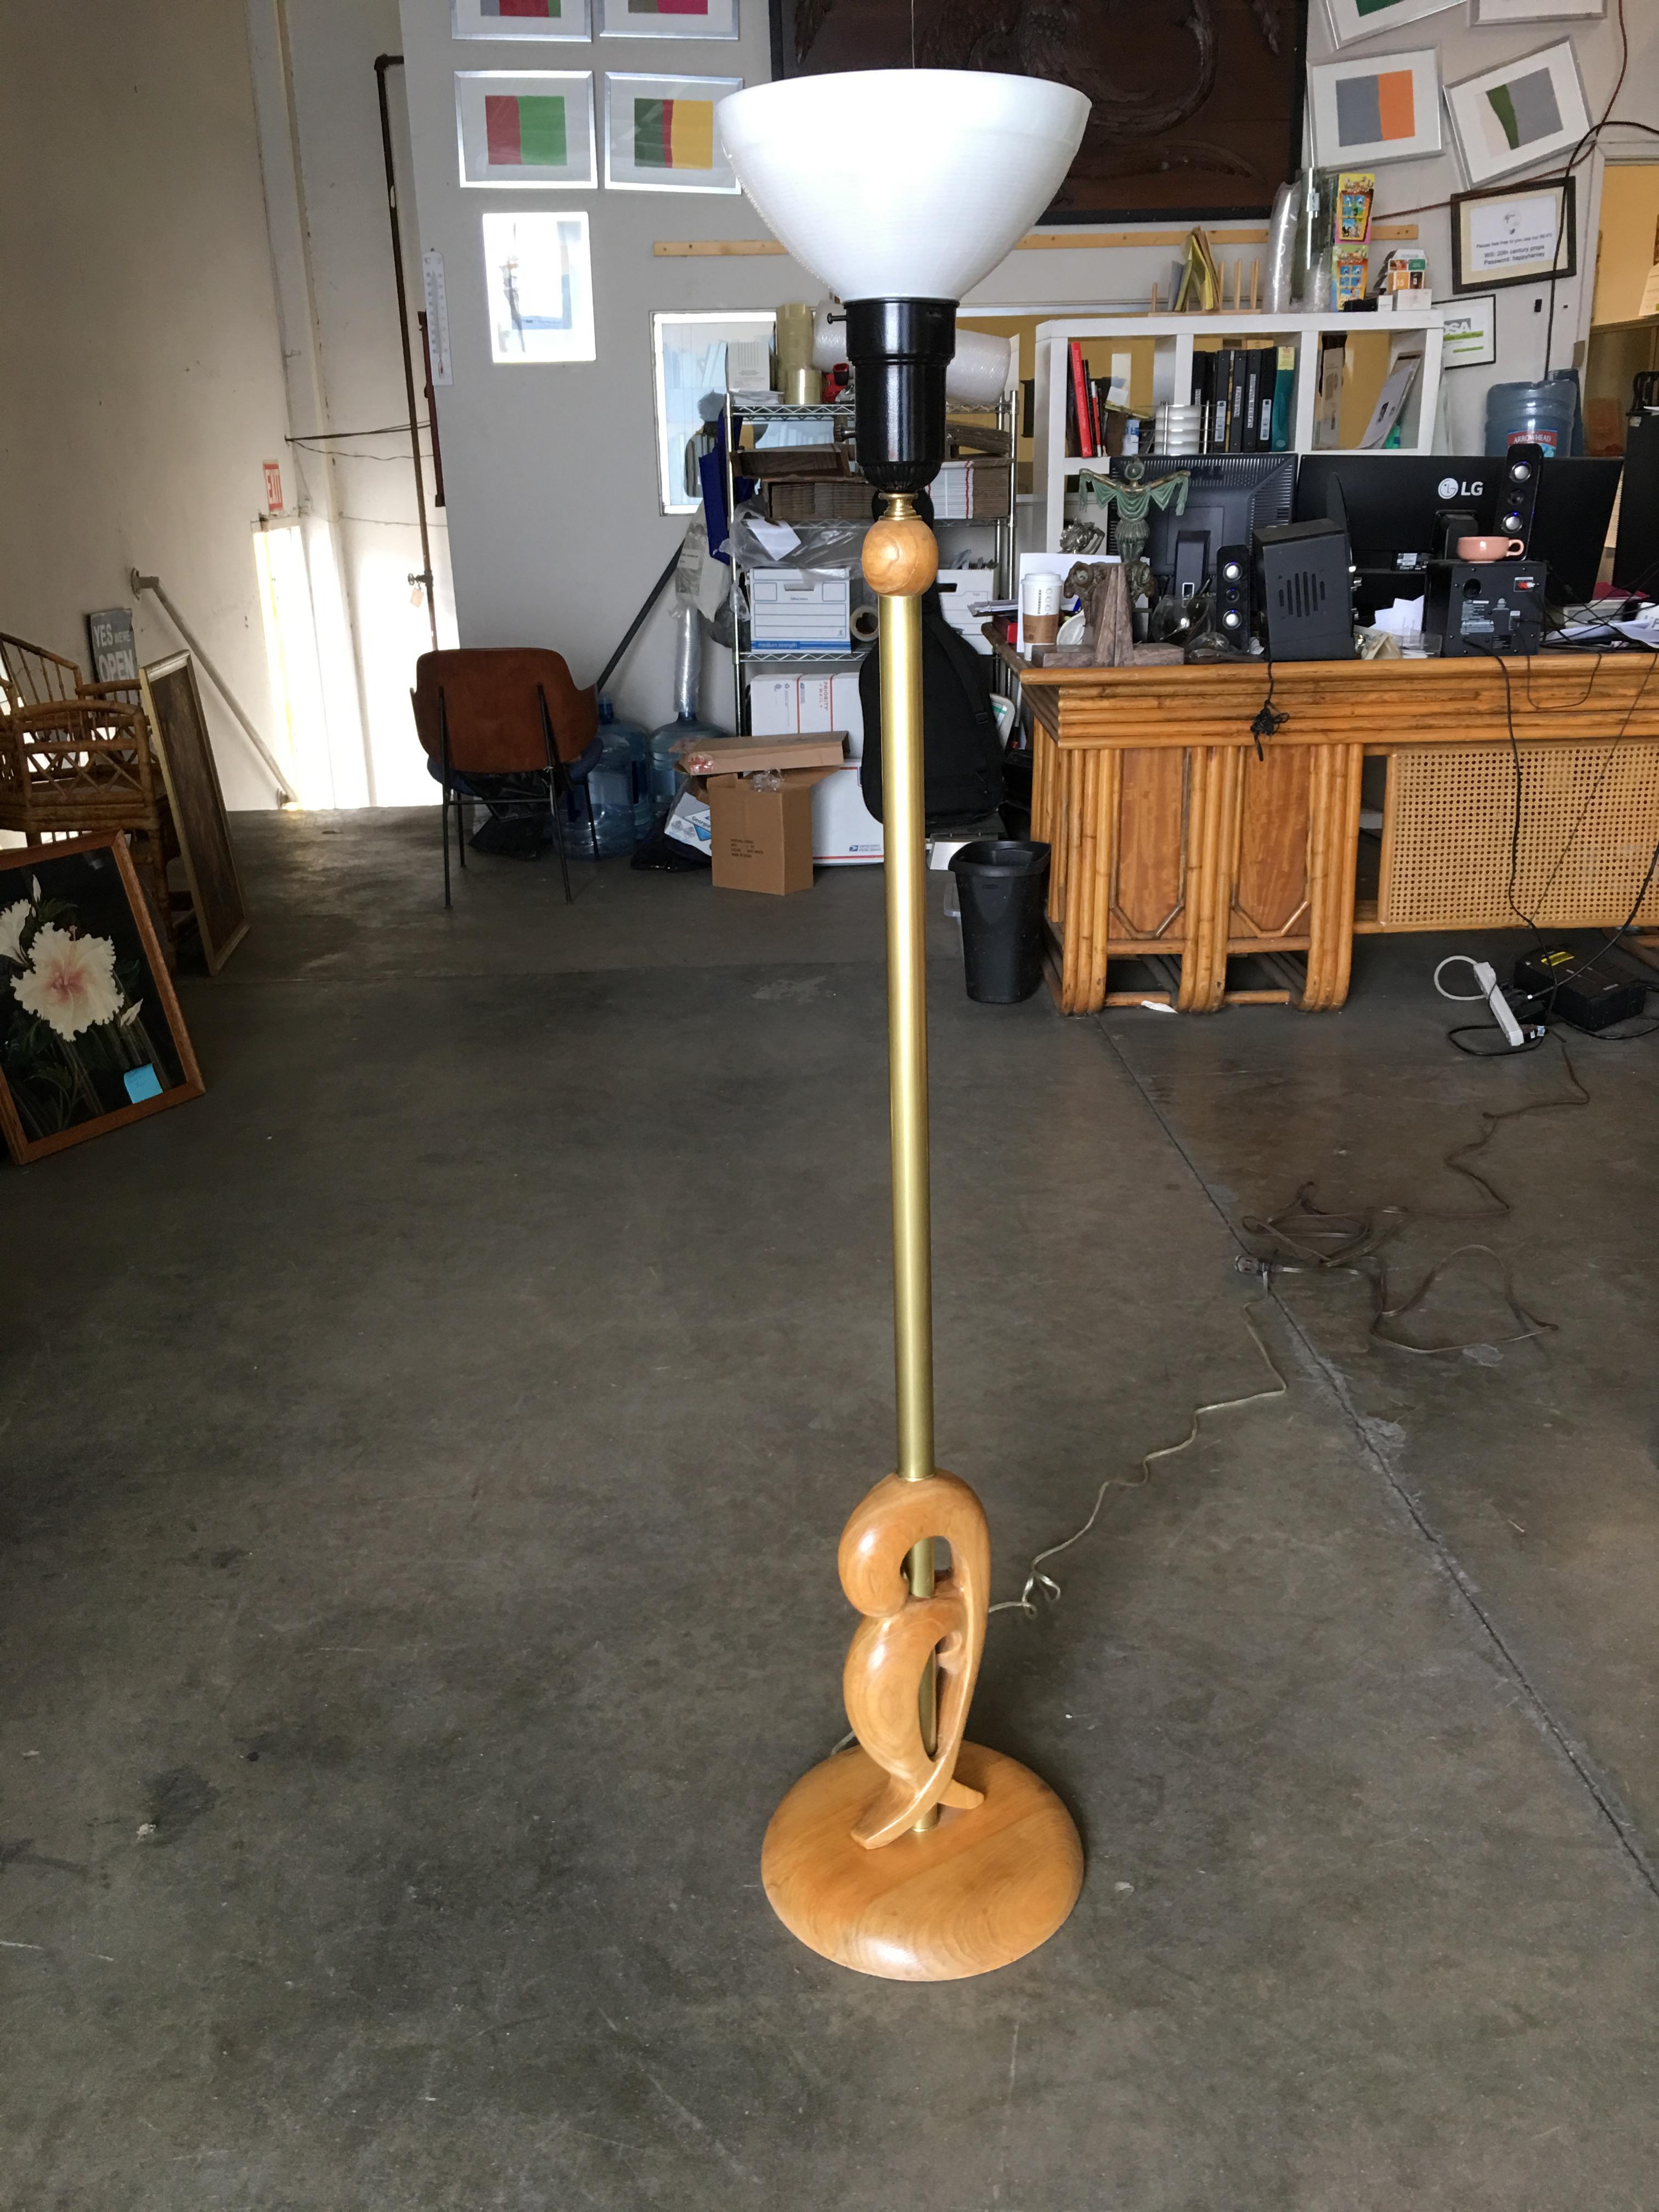 Heifetz style midcentury hand carved abstract wood torchiere floor lamp pair with milk glass shades and brass accents.